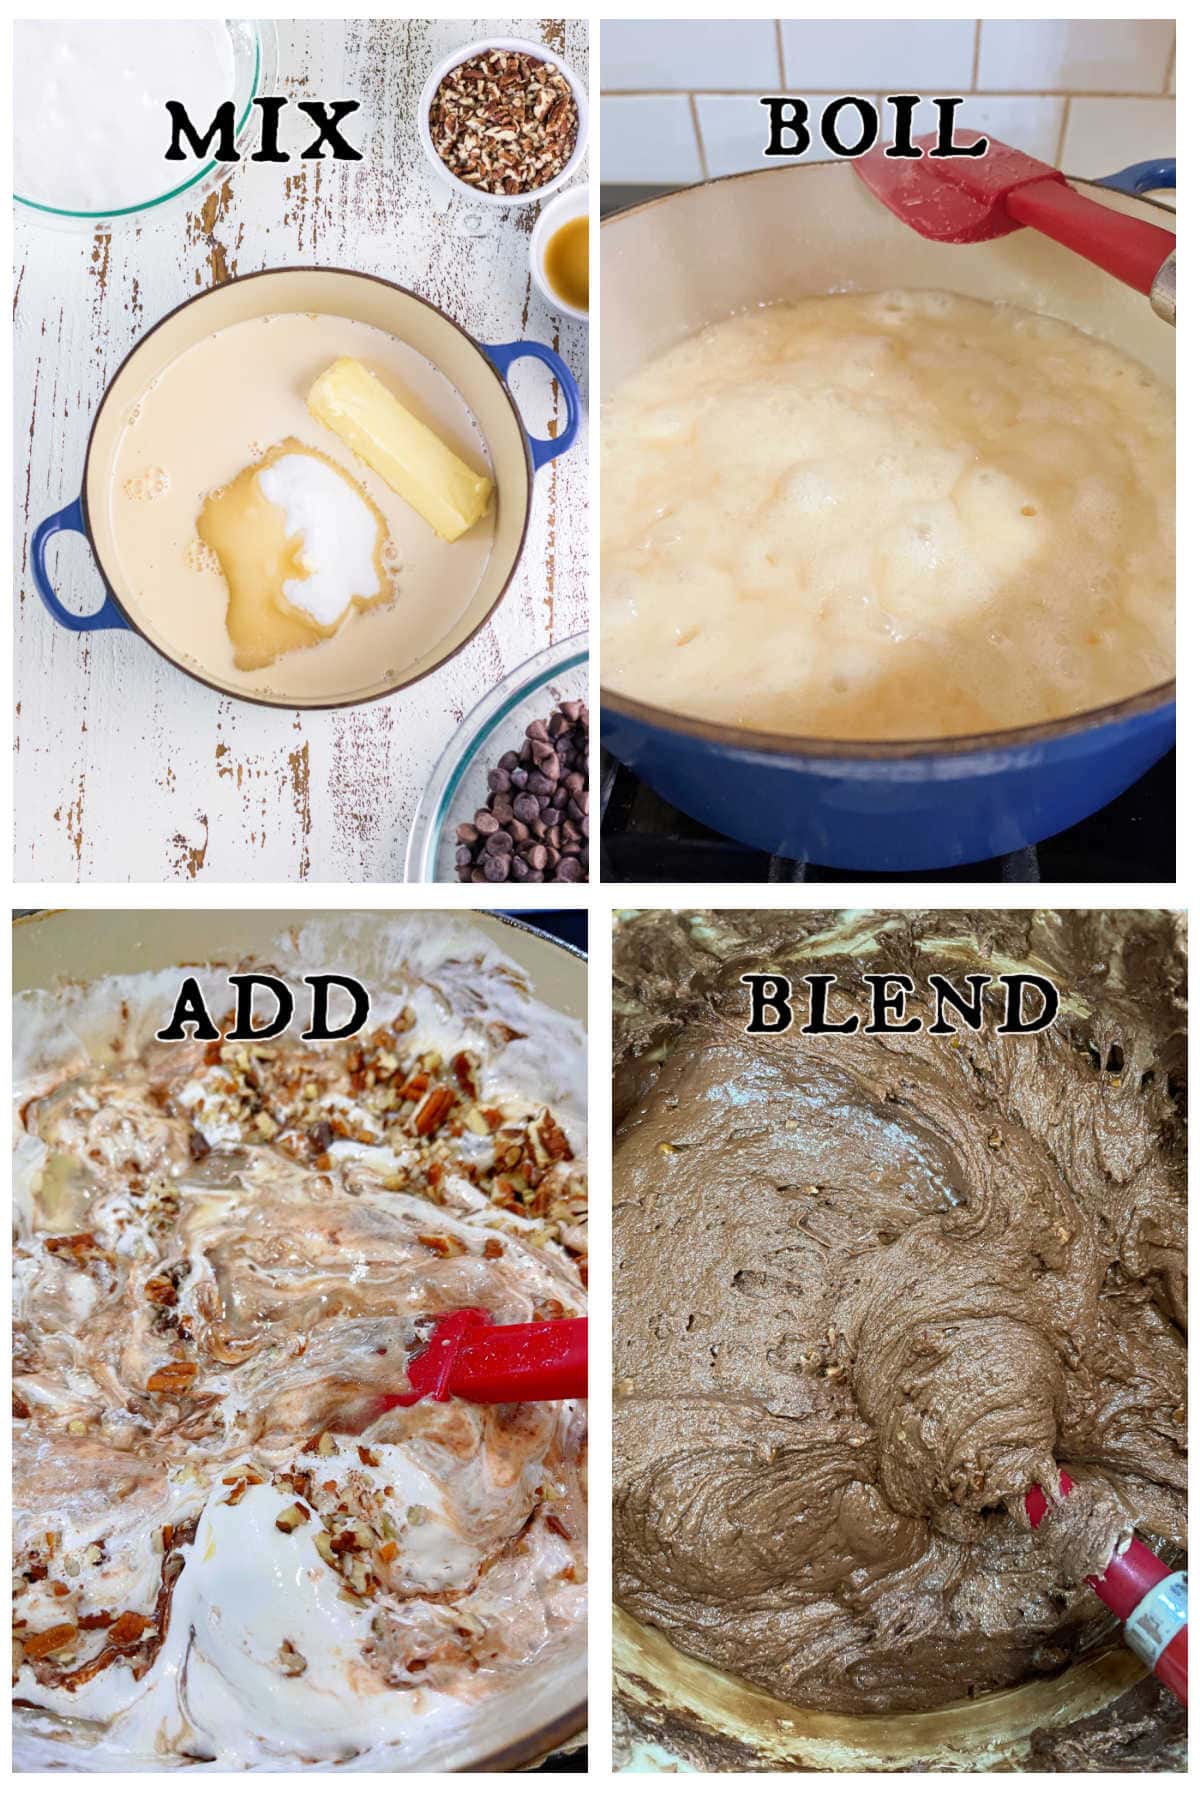 Step by step images showing how to make old fashioned fudge.